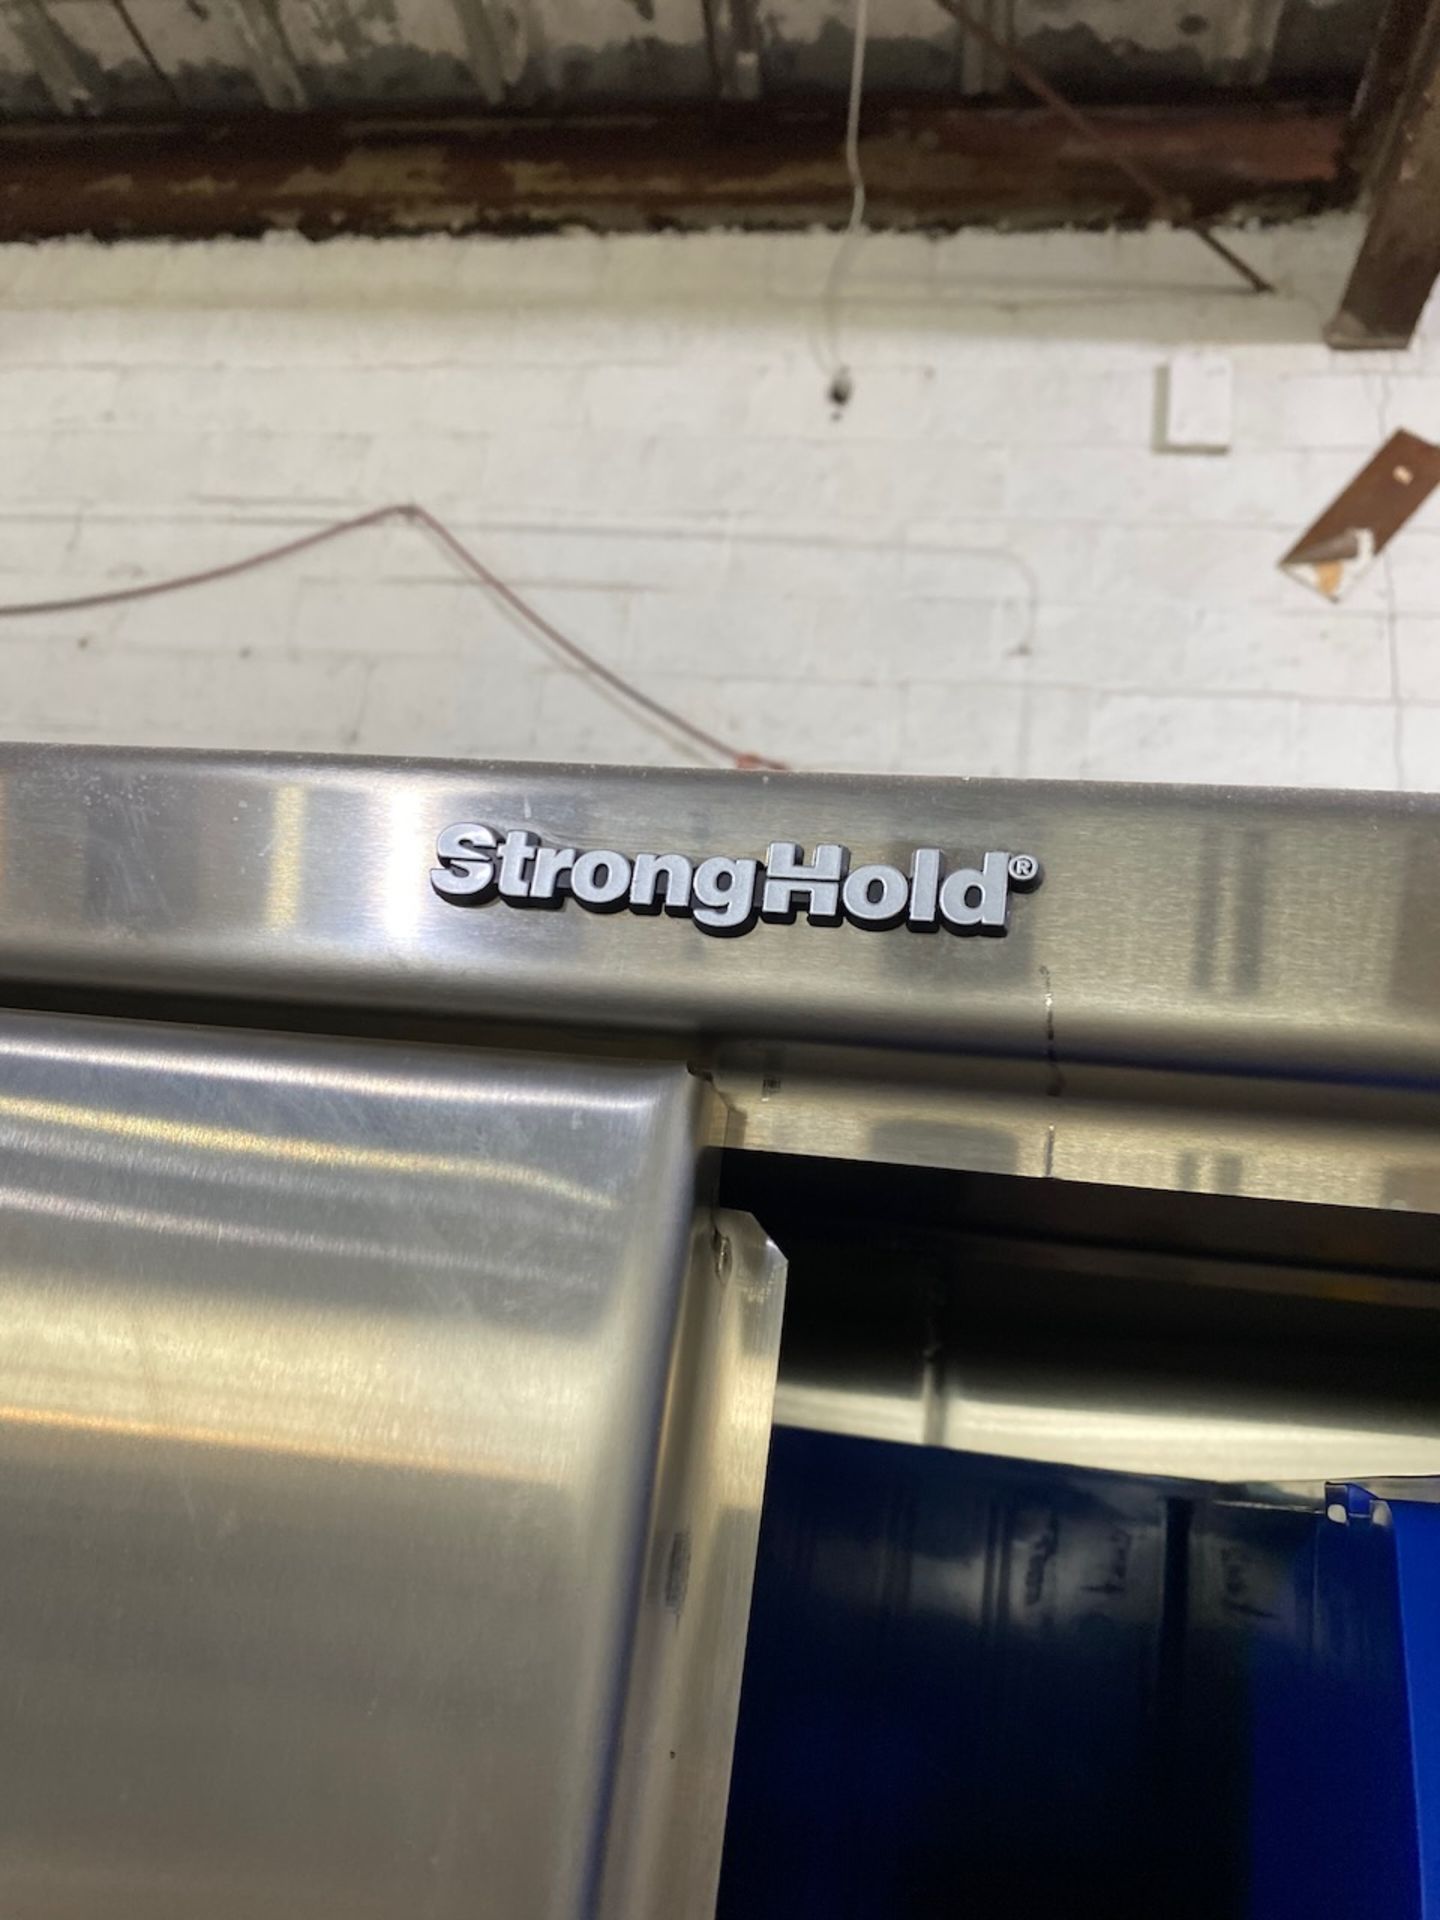 Stronghold Stainless Steel Cabinet - Image 4 of 4